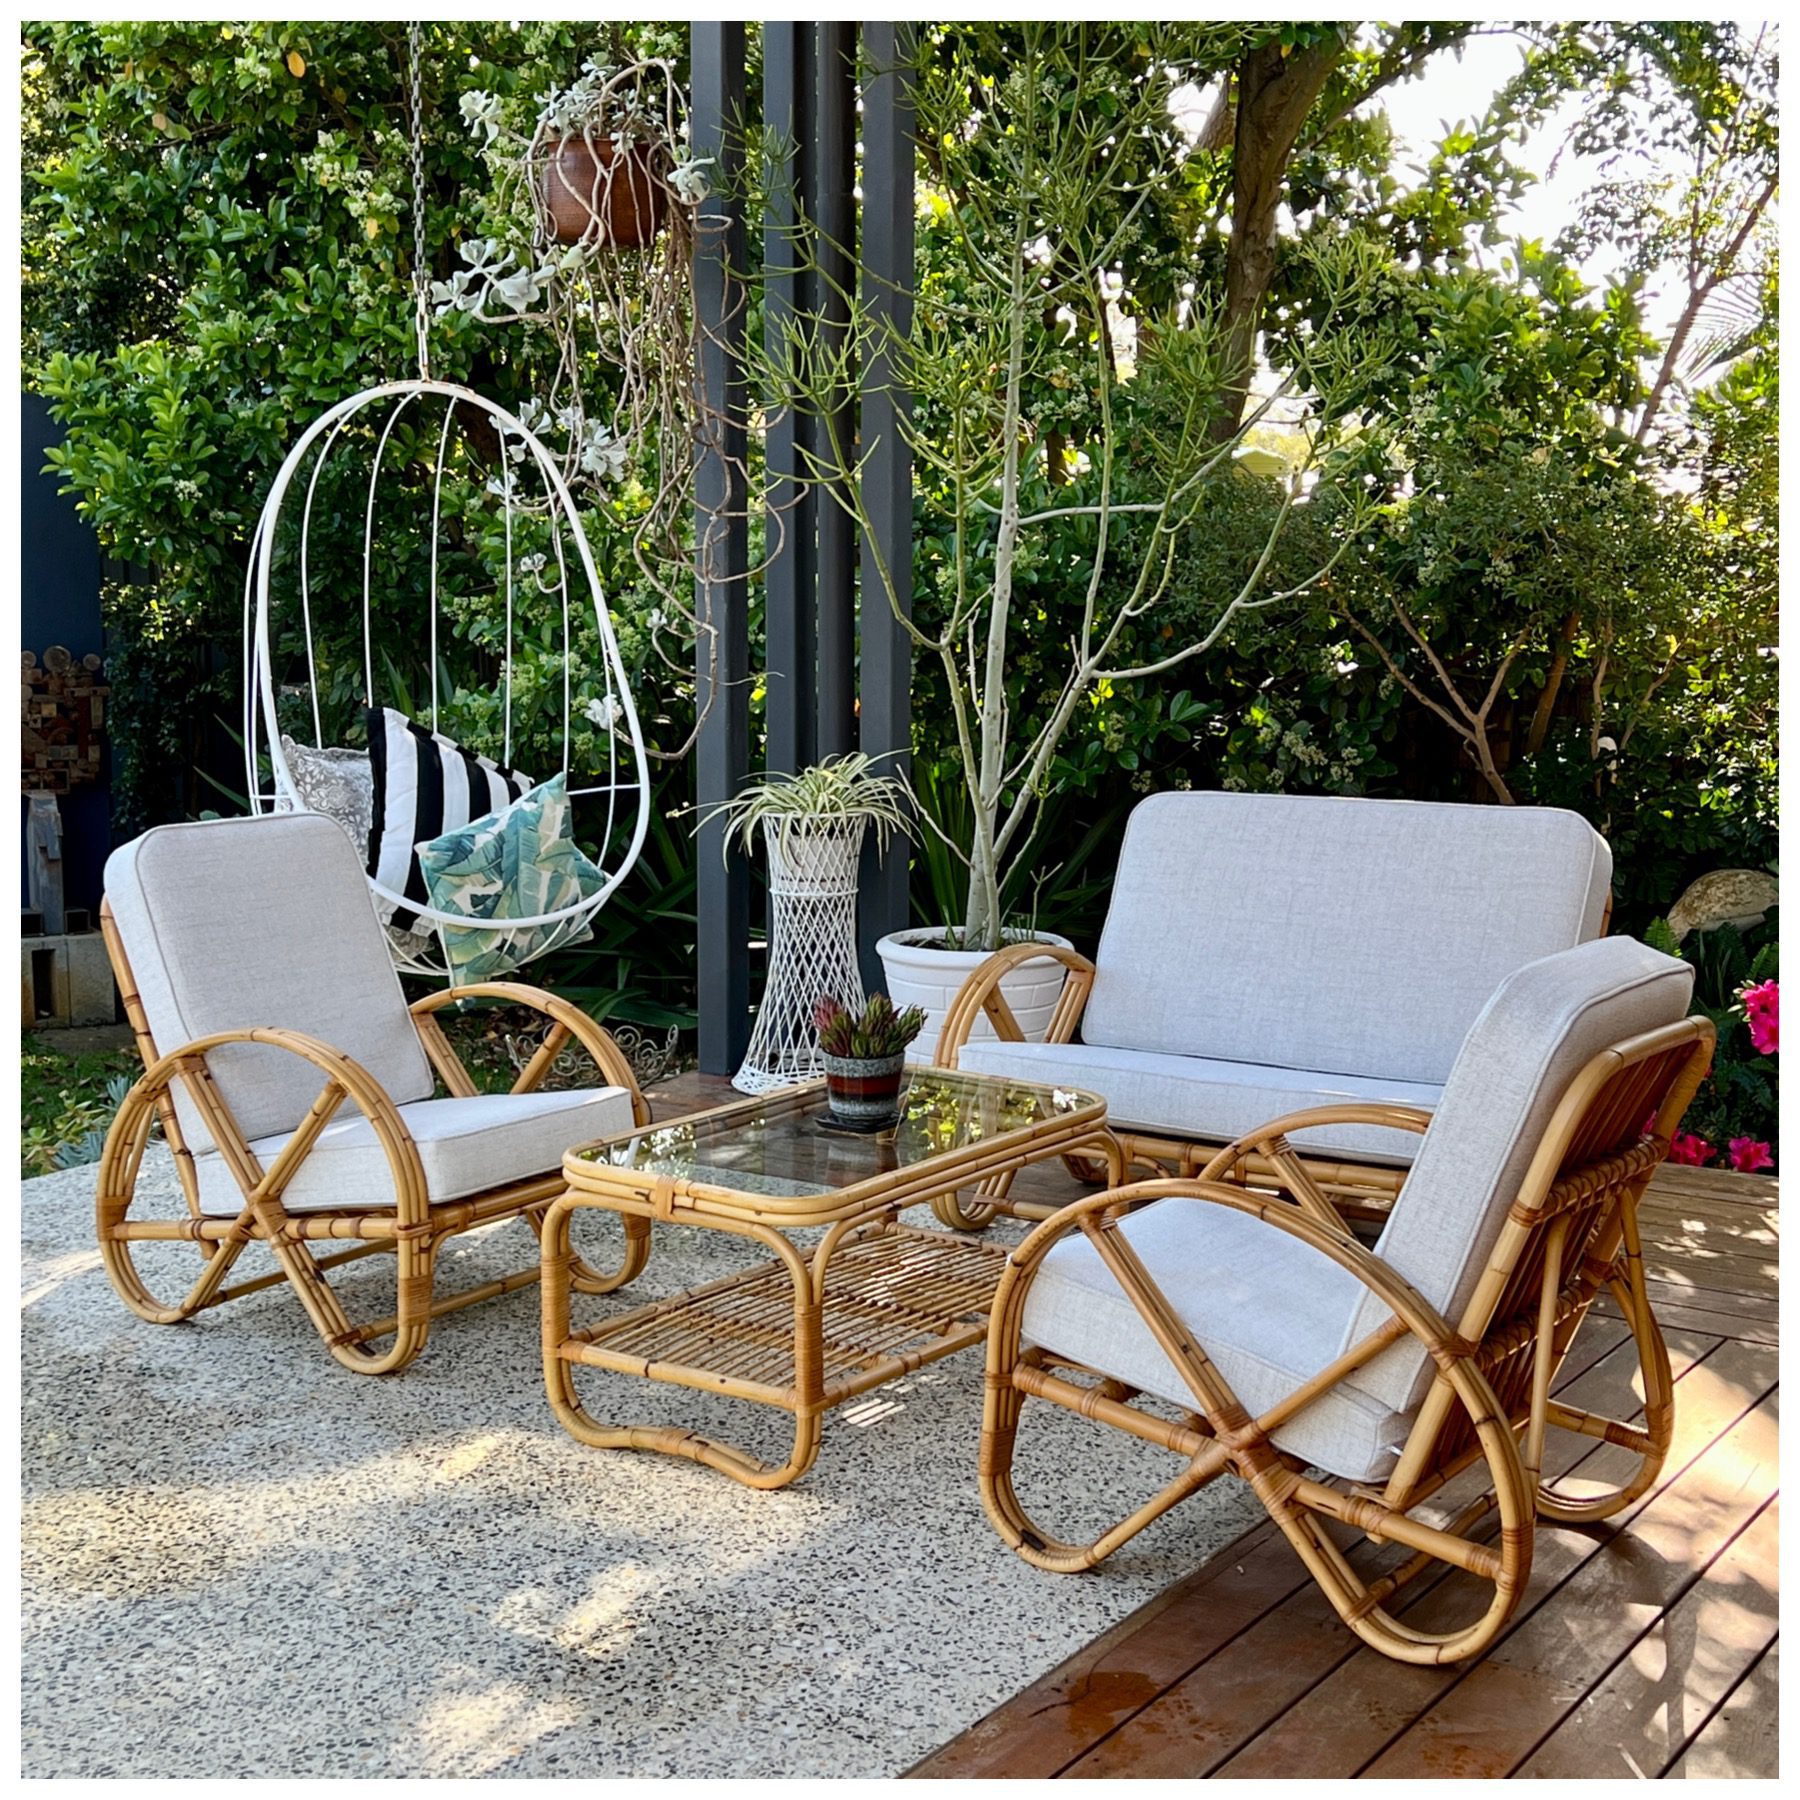 Vintage Cane Pretzel Chairs, Sofa and Table